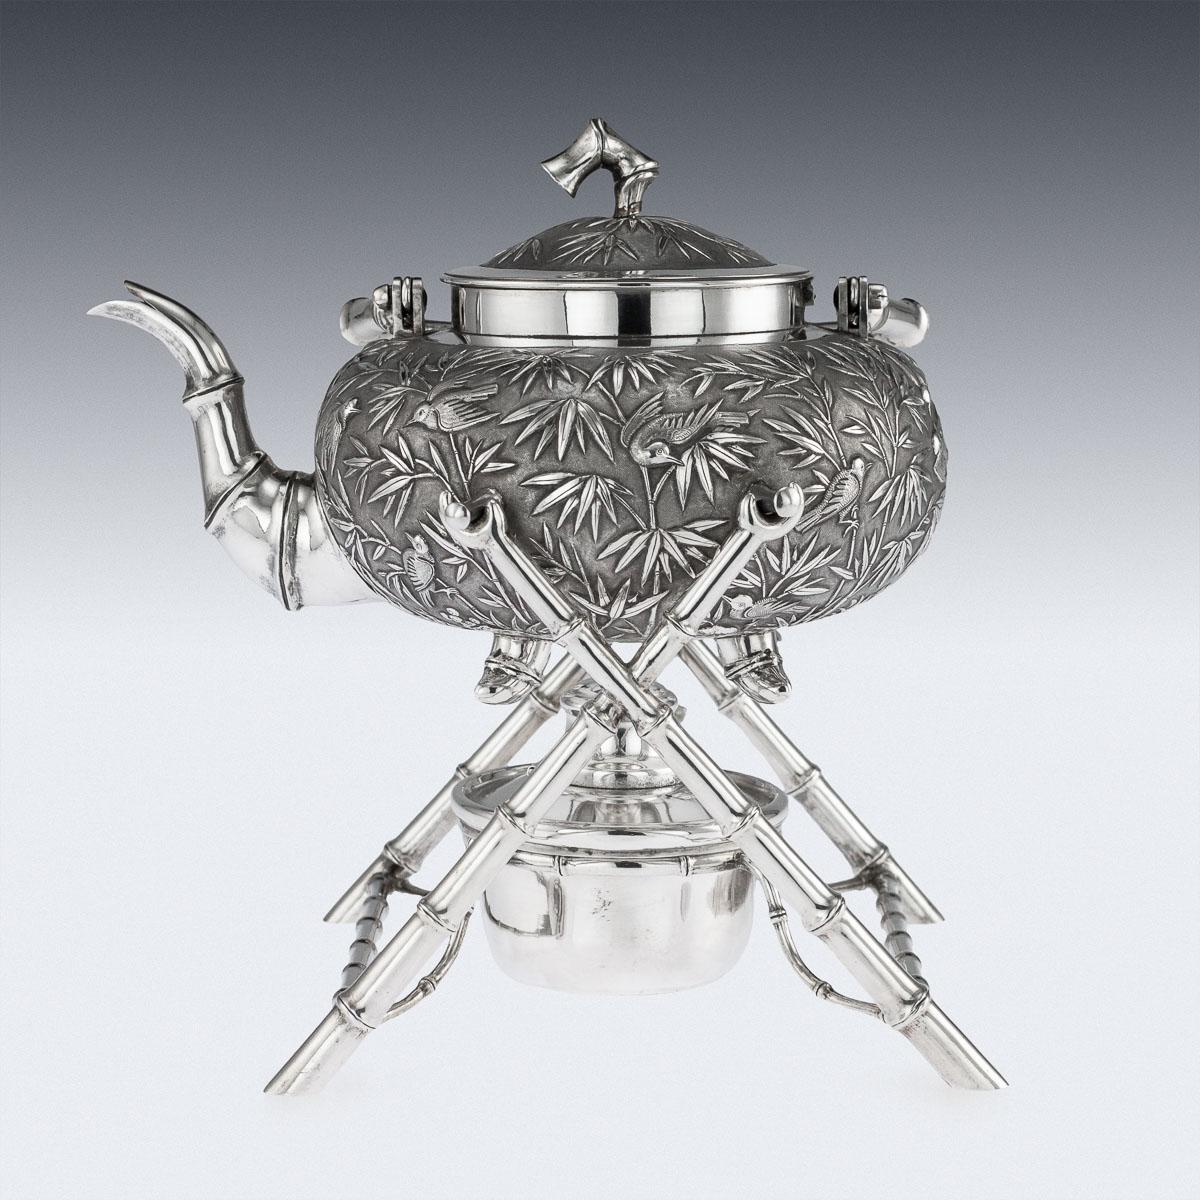 Antique 19th century Chinese export solid silver tea kettle, chased in relief with floral bamboo decoration and various birds perching on tree branches, the domed lids mounted with bamboo finial. The kettle is suspended on a stylized,